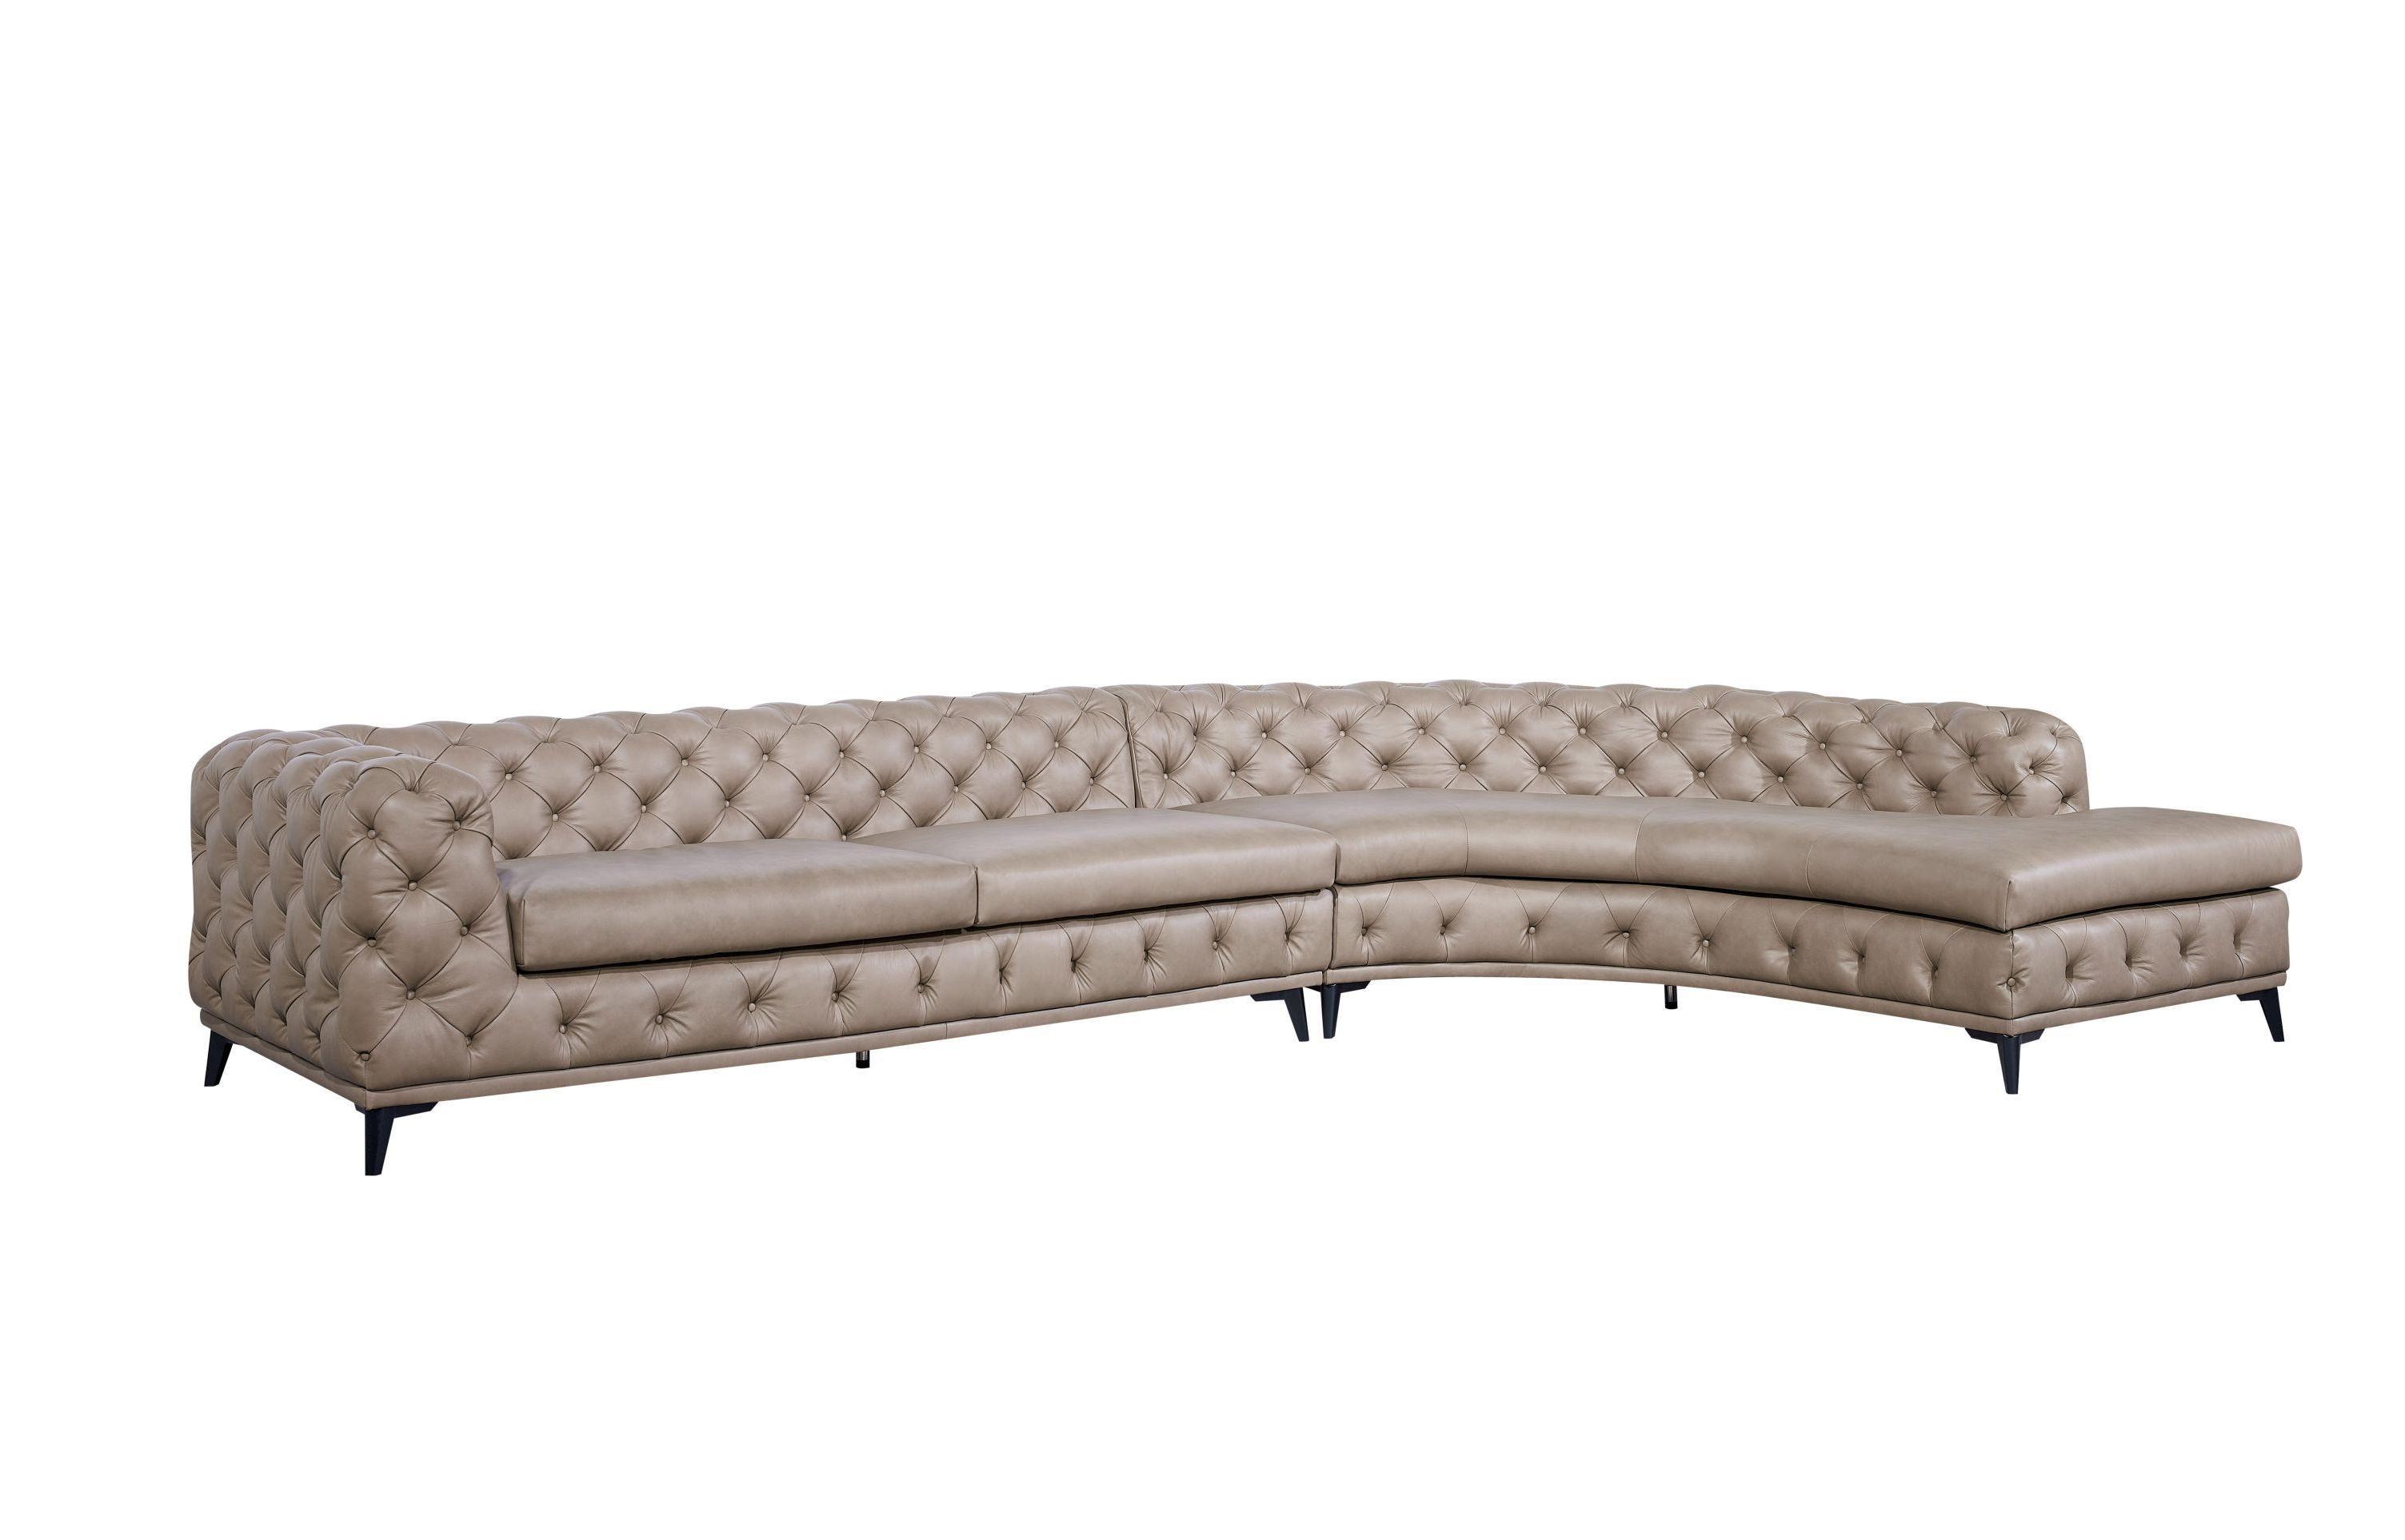 Contemporary, Modern Sectional Sofa Kohl VGEV2179-TAN-RAF-SECT in Tan Leather